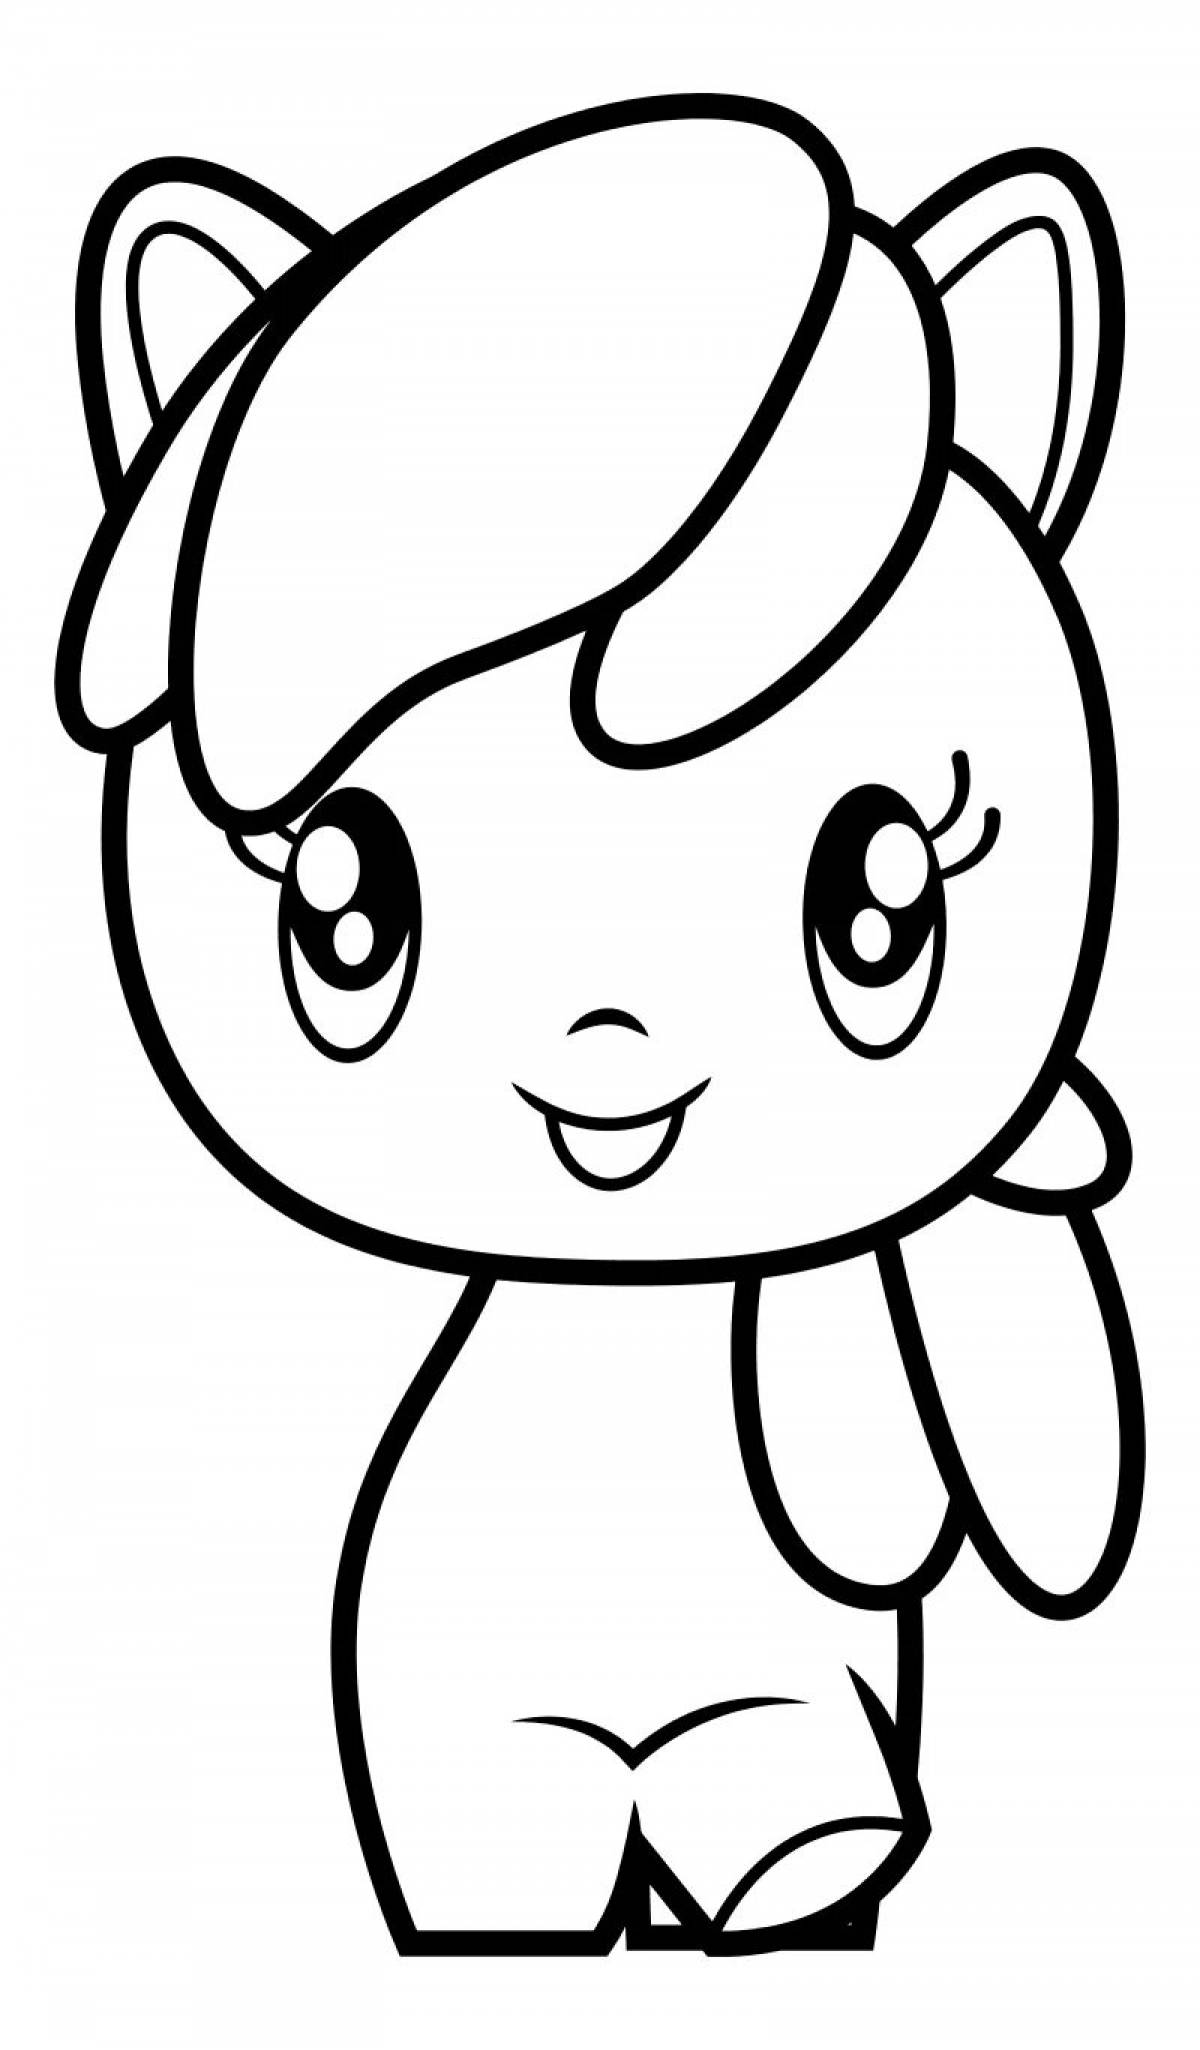 Coloring page sparkling cute ponies